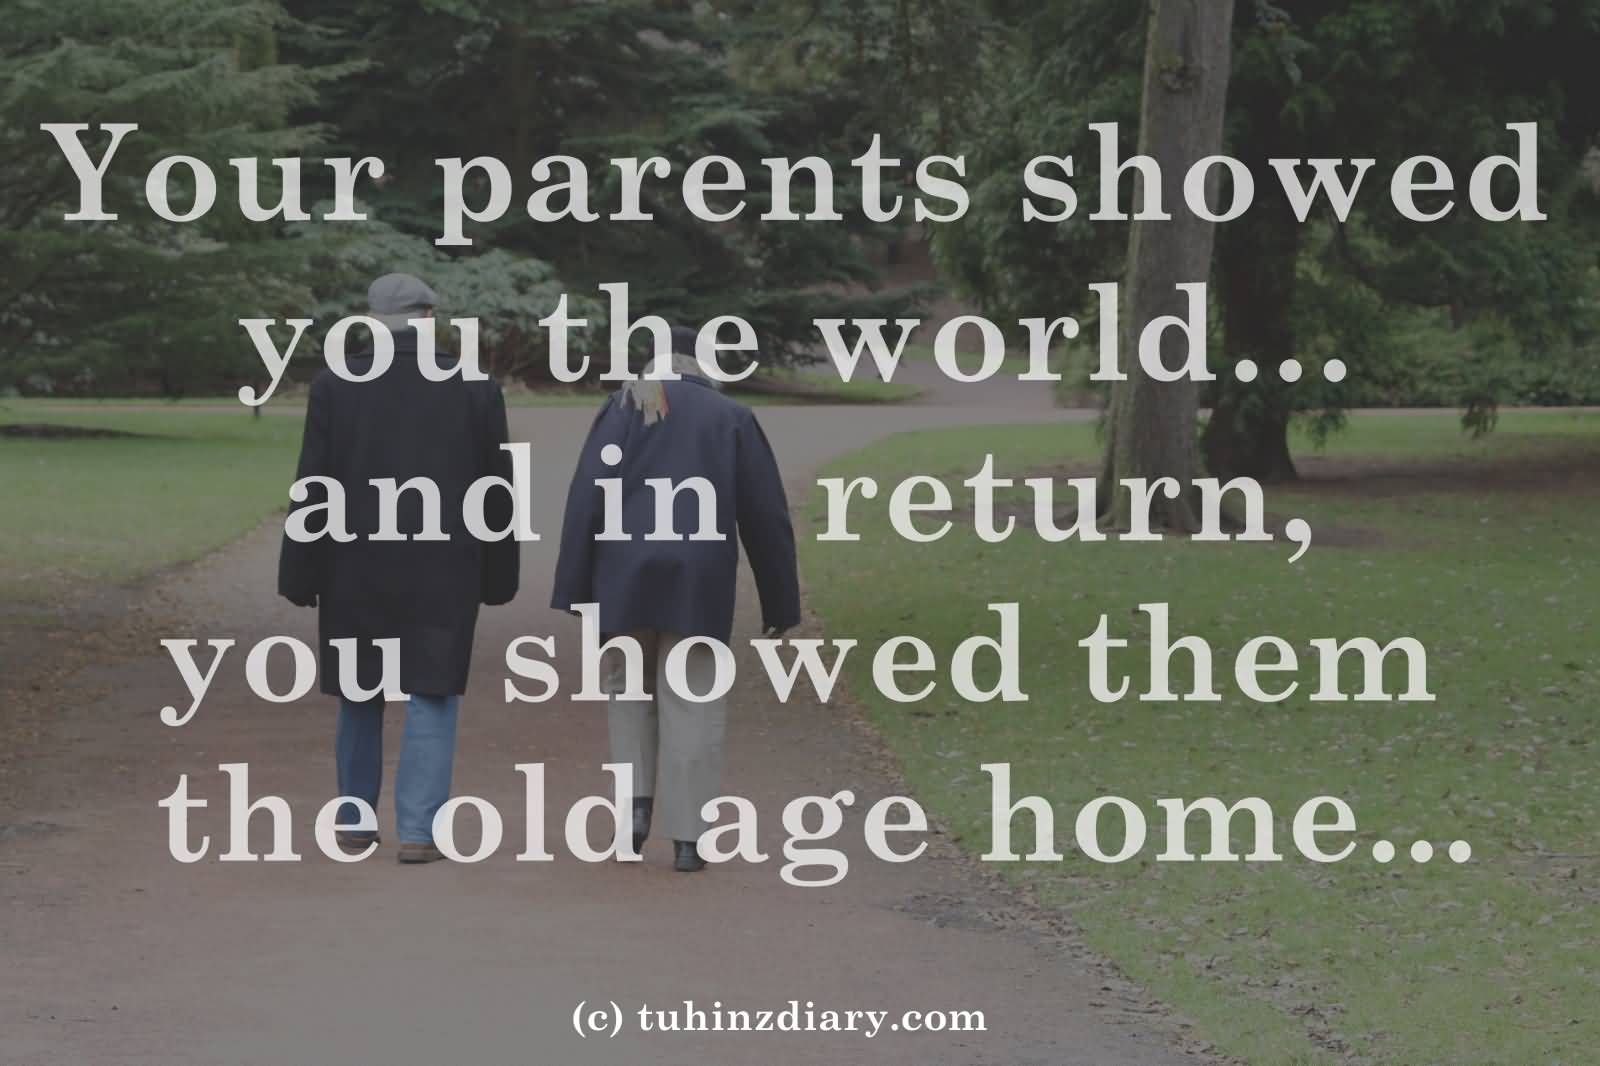 Your parents showed you the world and in return you showed them old age homes